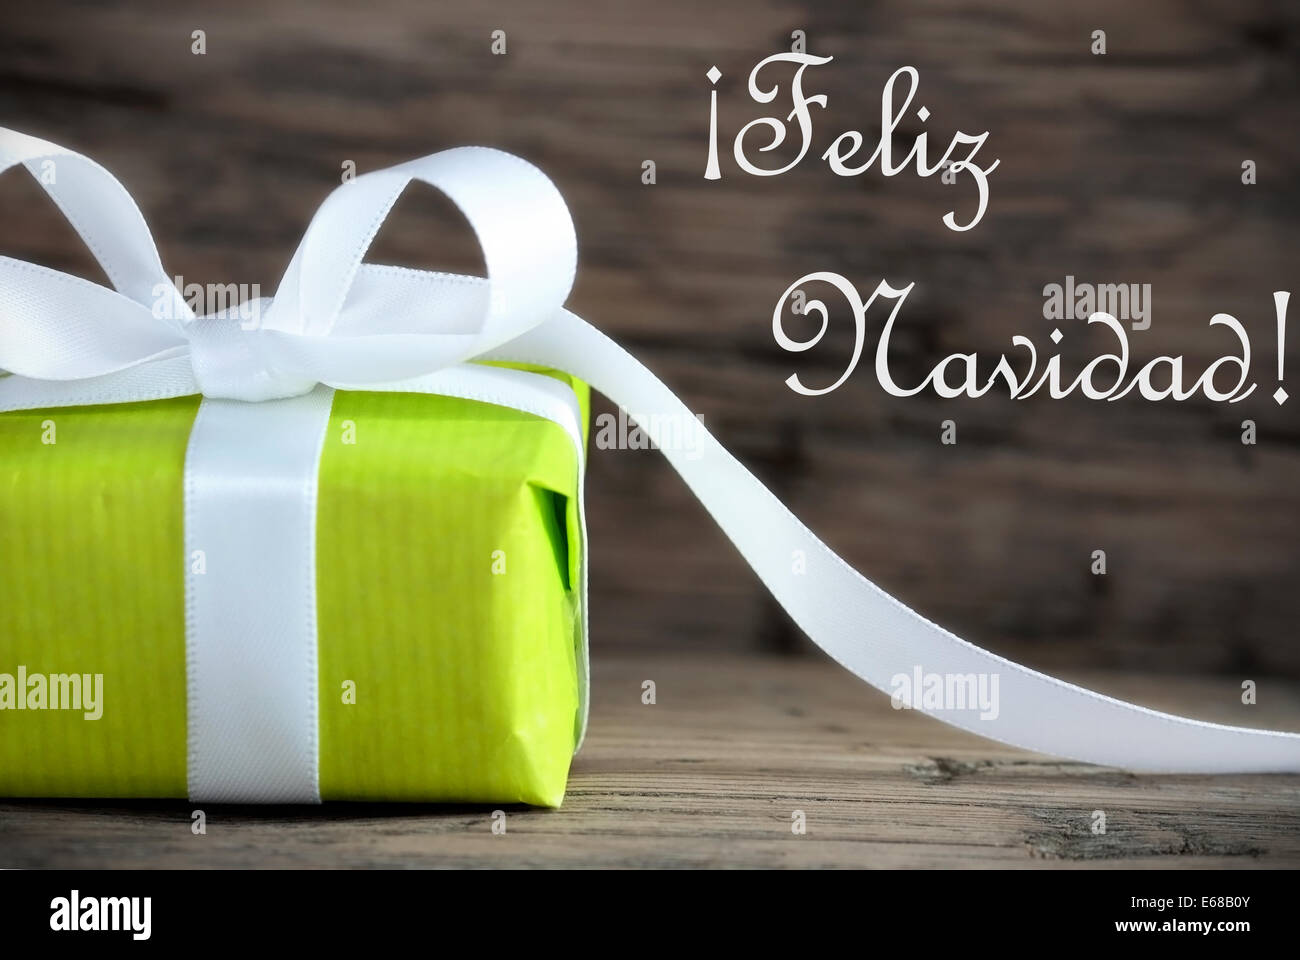 Green Present with the Spanish Words Feliz Navidad, which means Merry Christmas, on Wooden Background Stock Photo